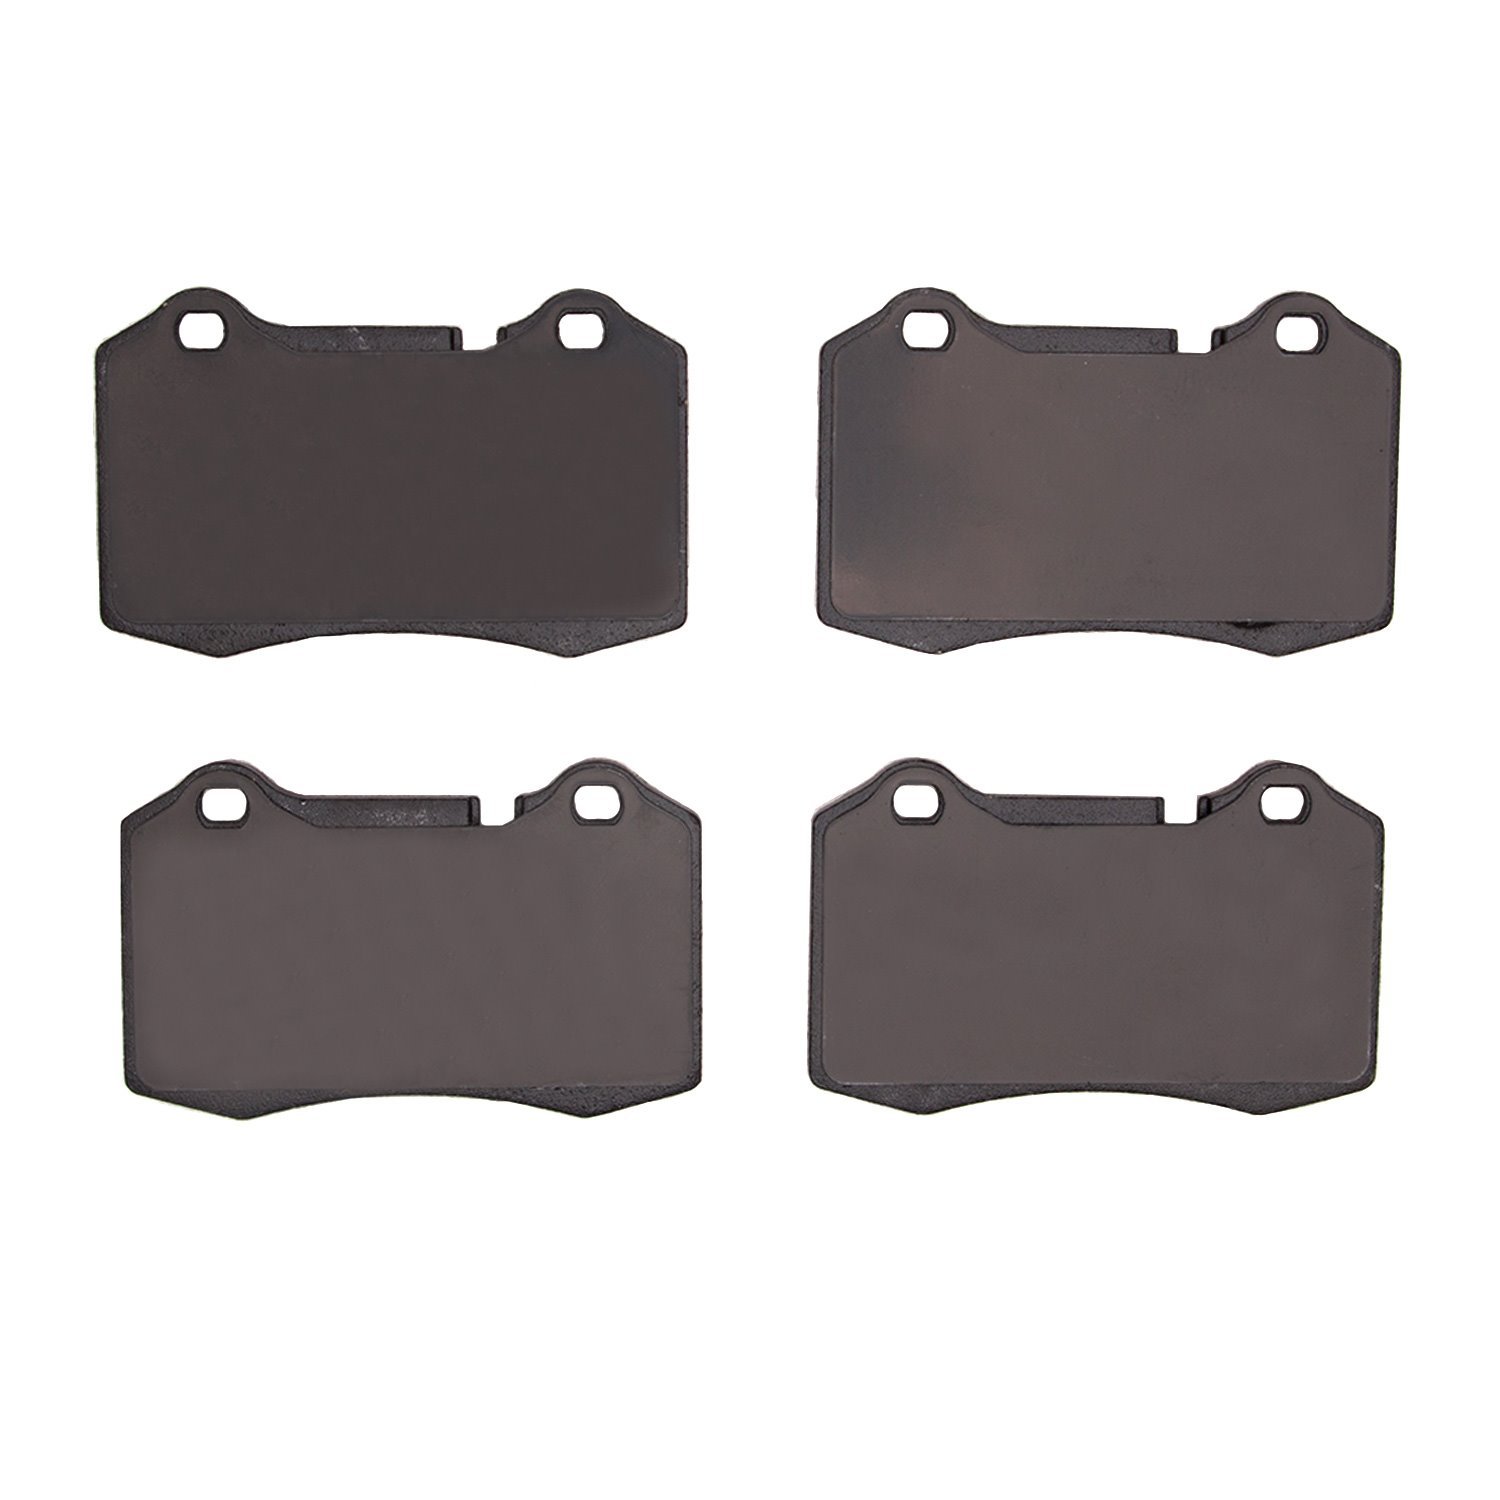 1551-1166-00 5000 Advanced Low-Metallic Brake Pads, 2000-2019 Multiple Makes/Models, Position: Front,Rear